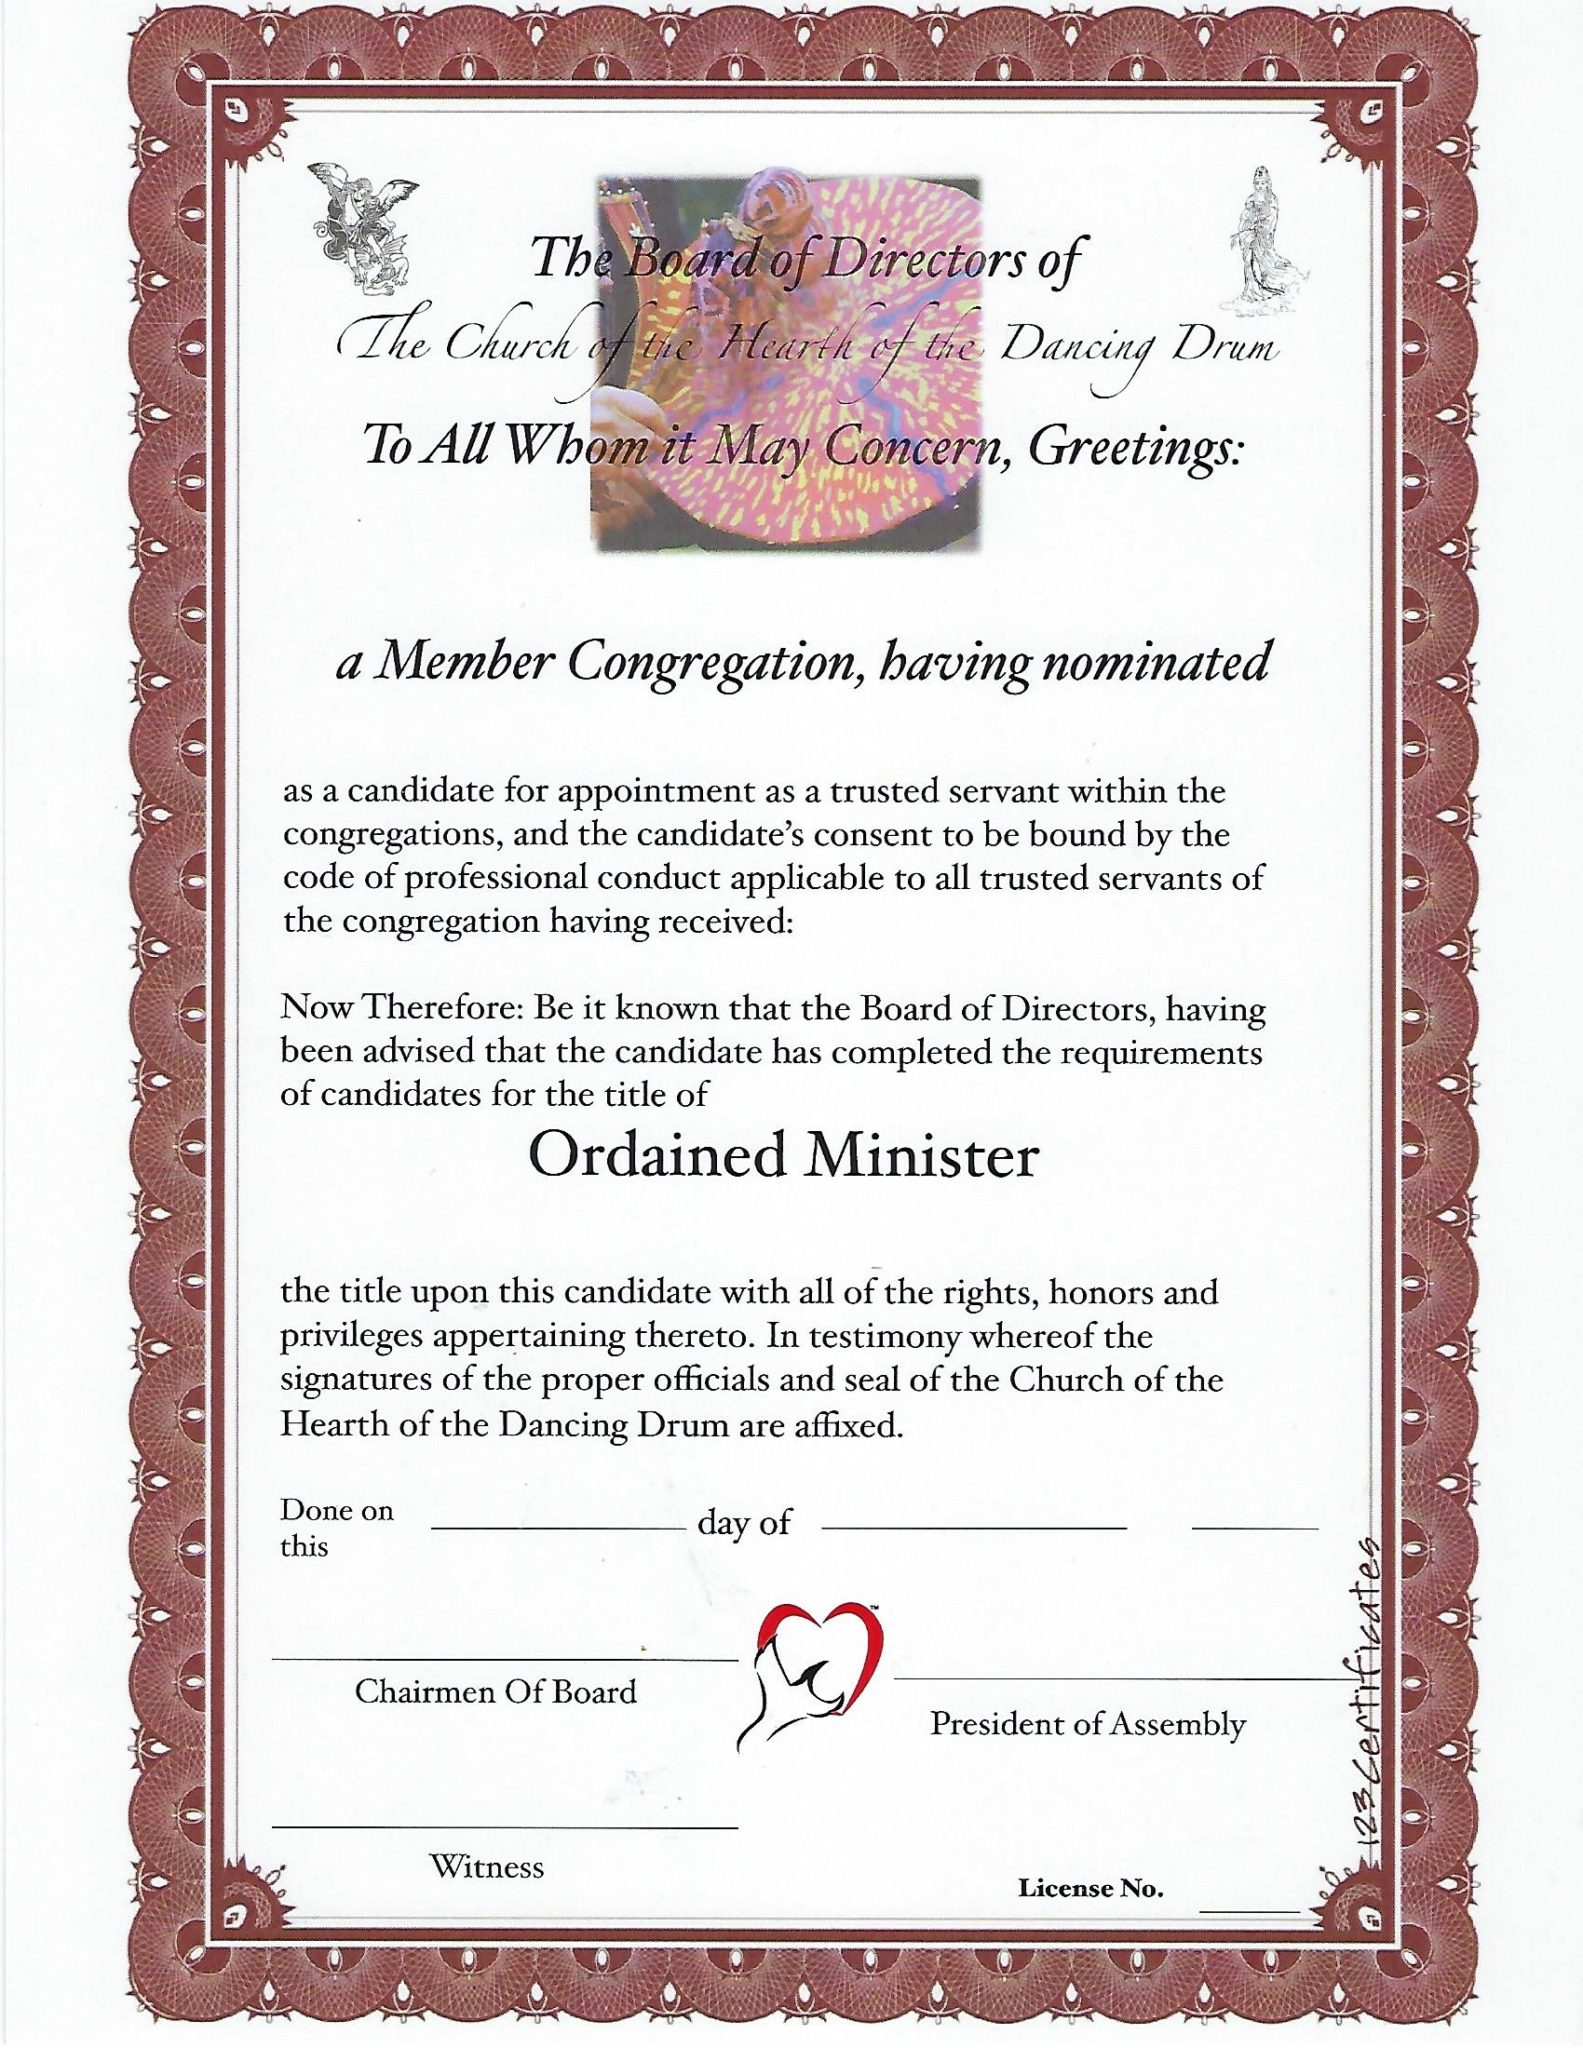 Ordained Minister License Number